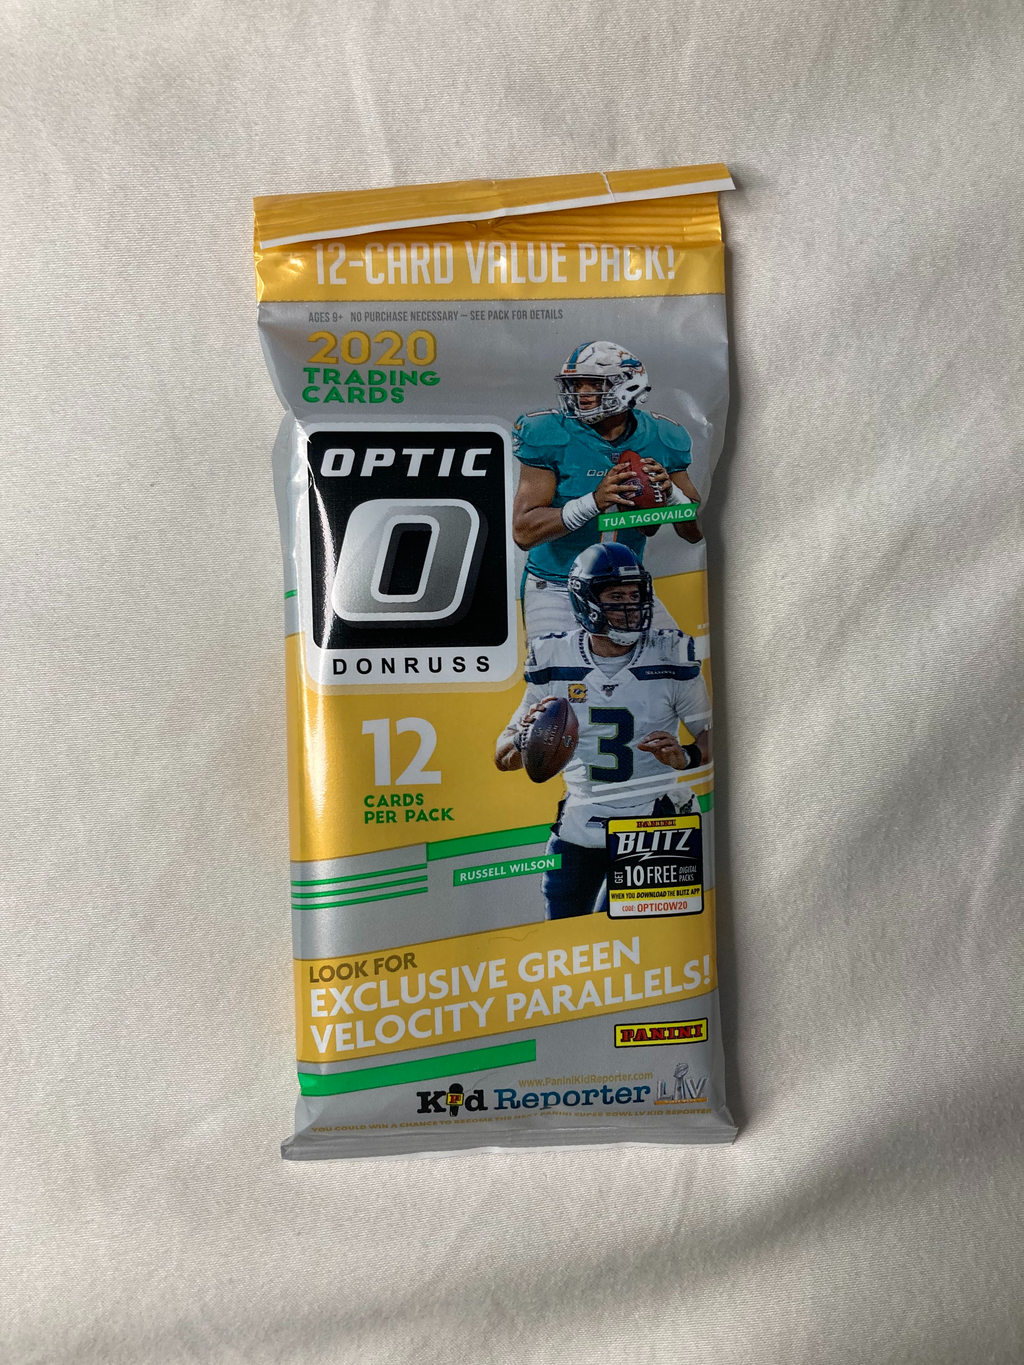 2020-21 Optic Football 12 Card Fat Pack Collectible Card Pack